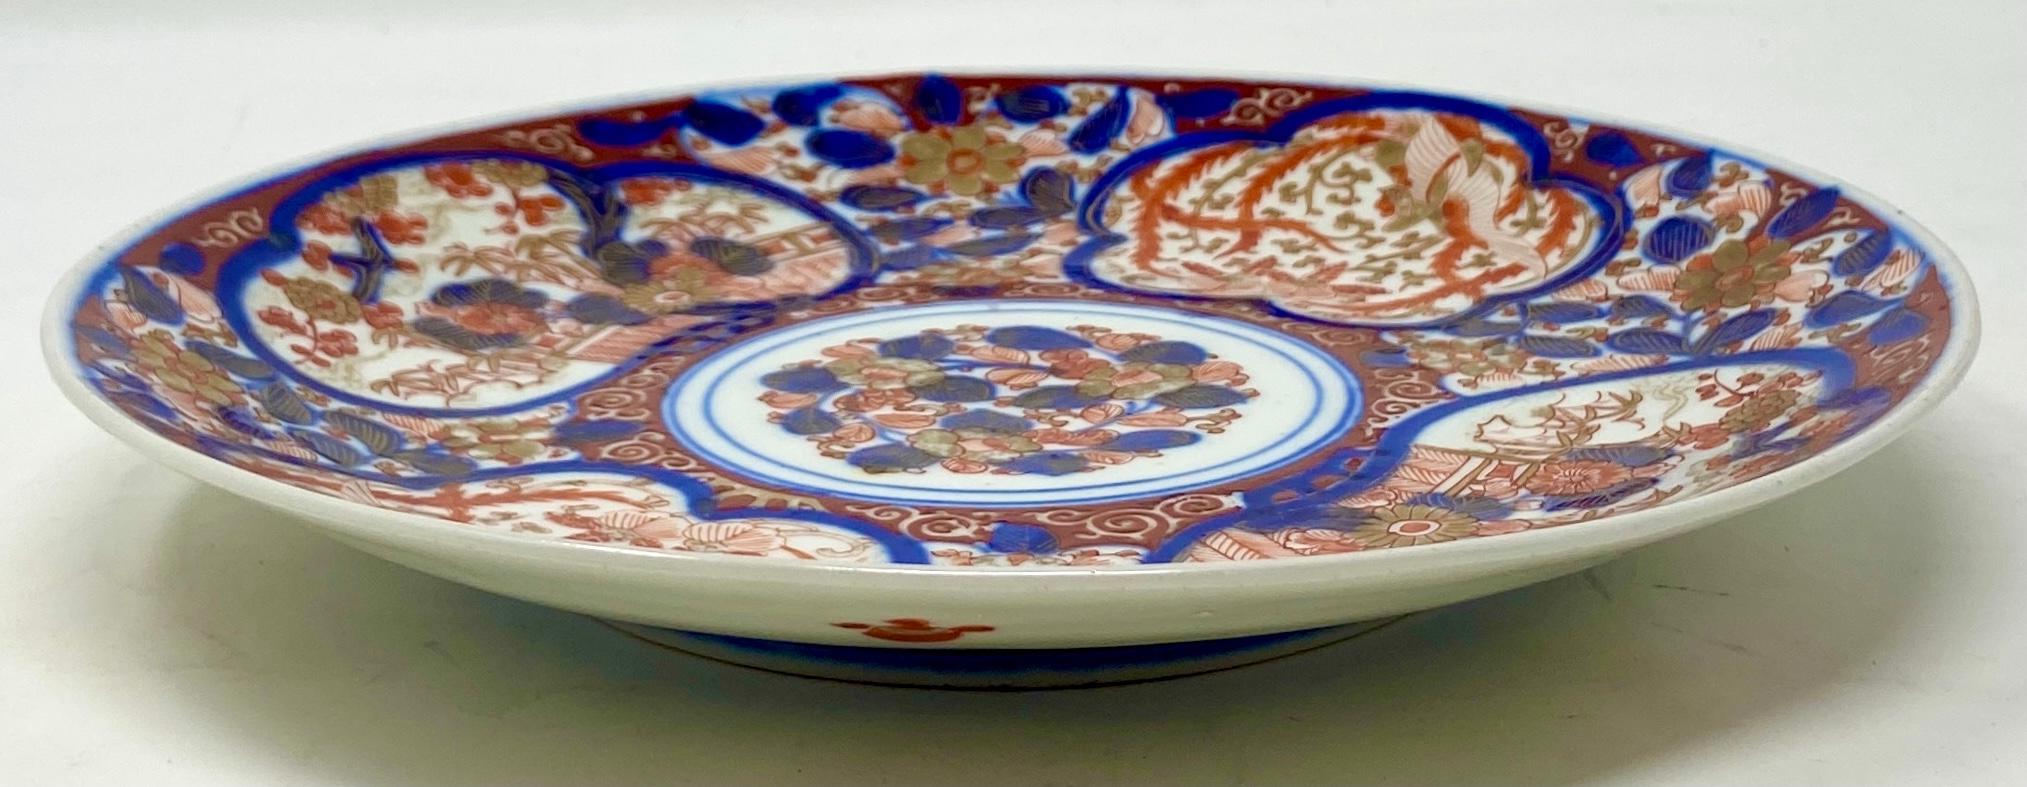 Antique Japanese Imari Porcelain Plate #6, Circa 1890's.
*Please note that there is an old repair on the bottom rim of this plate, and the price below reflects this.  Per the last 4 photos there is a smooth dimple in the rim that is the size of a